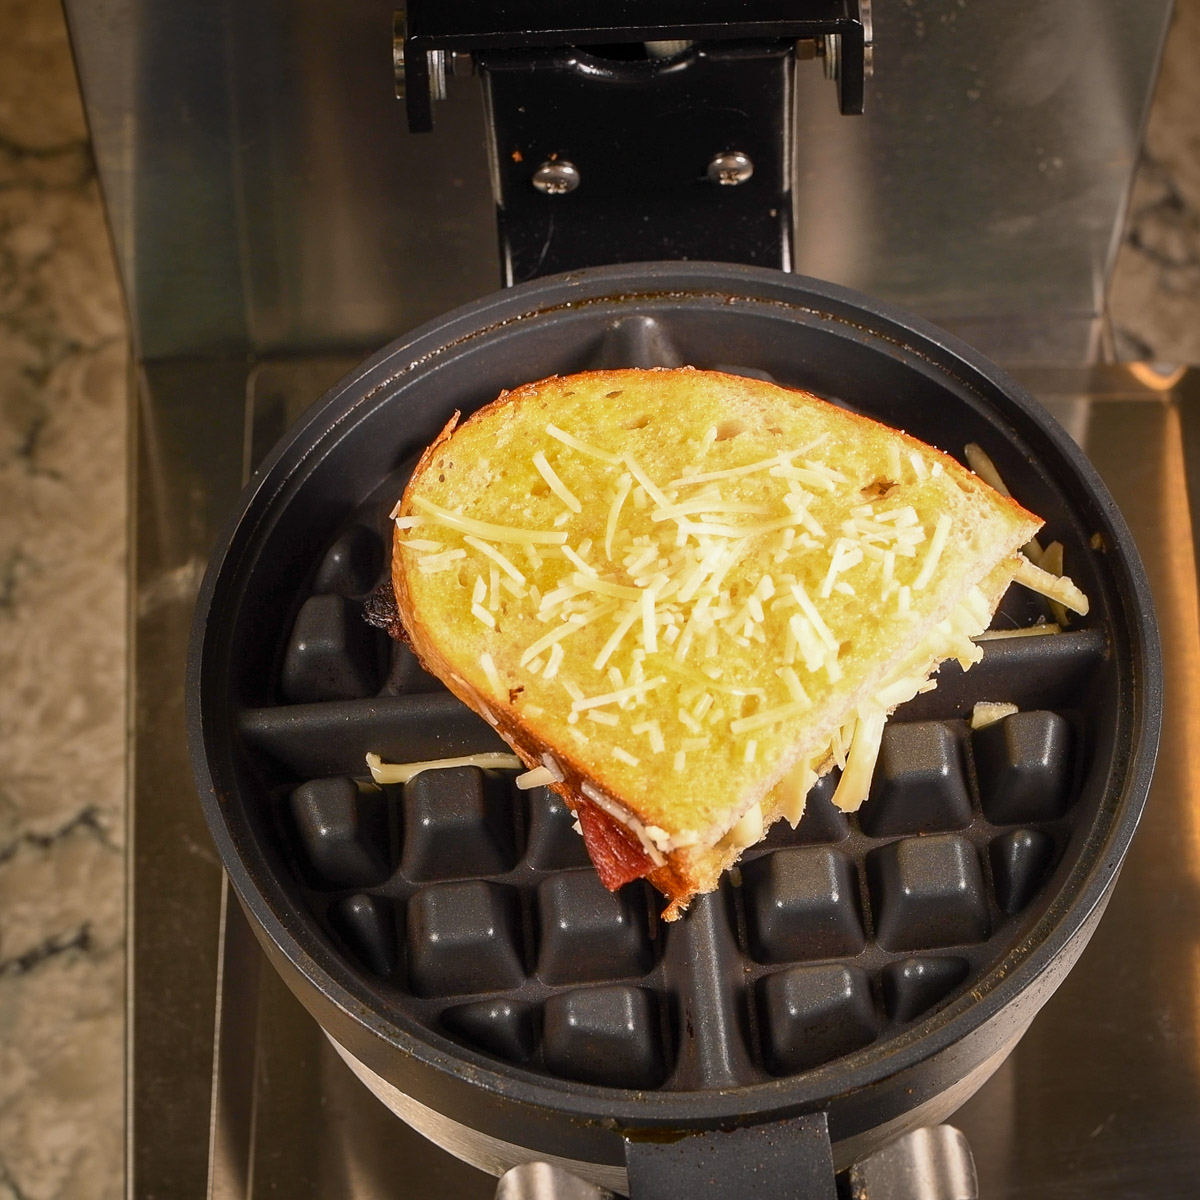 Place the sandwich in the middle of the waffle maker.